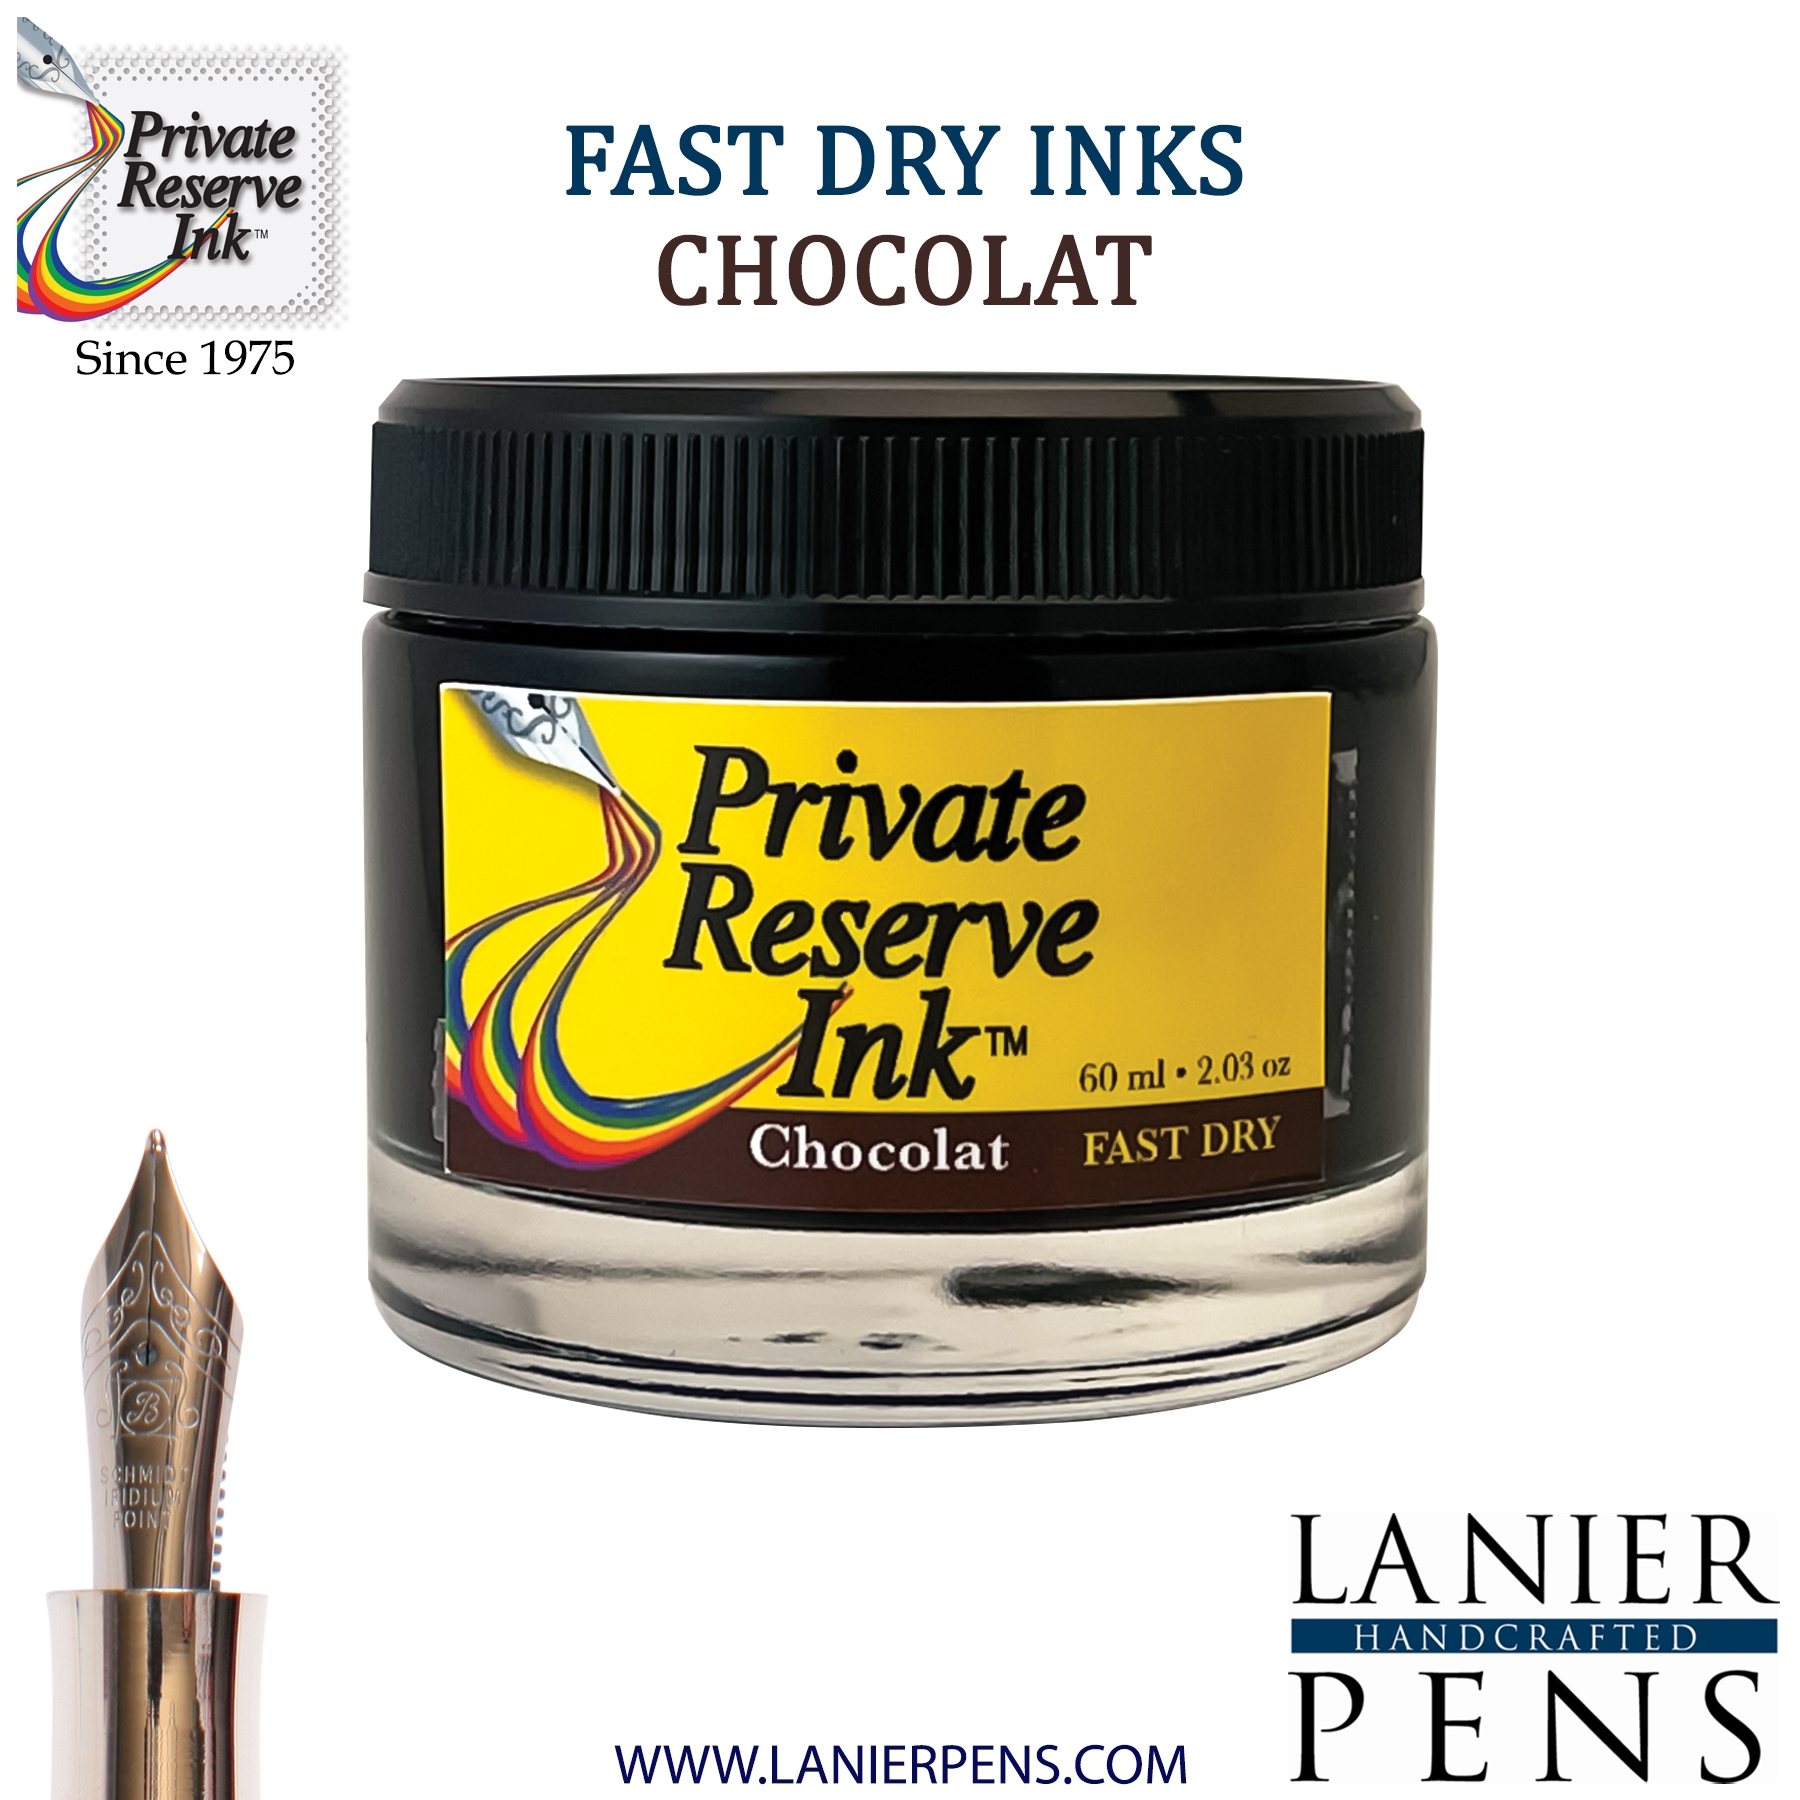 Private Reserve Ink Bottle 60ml - Chocolat-Fast Dry Ink (PR17040)